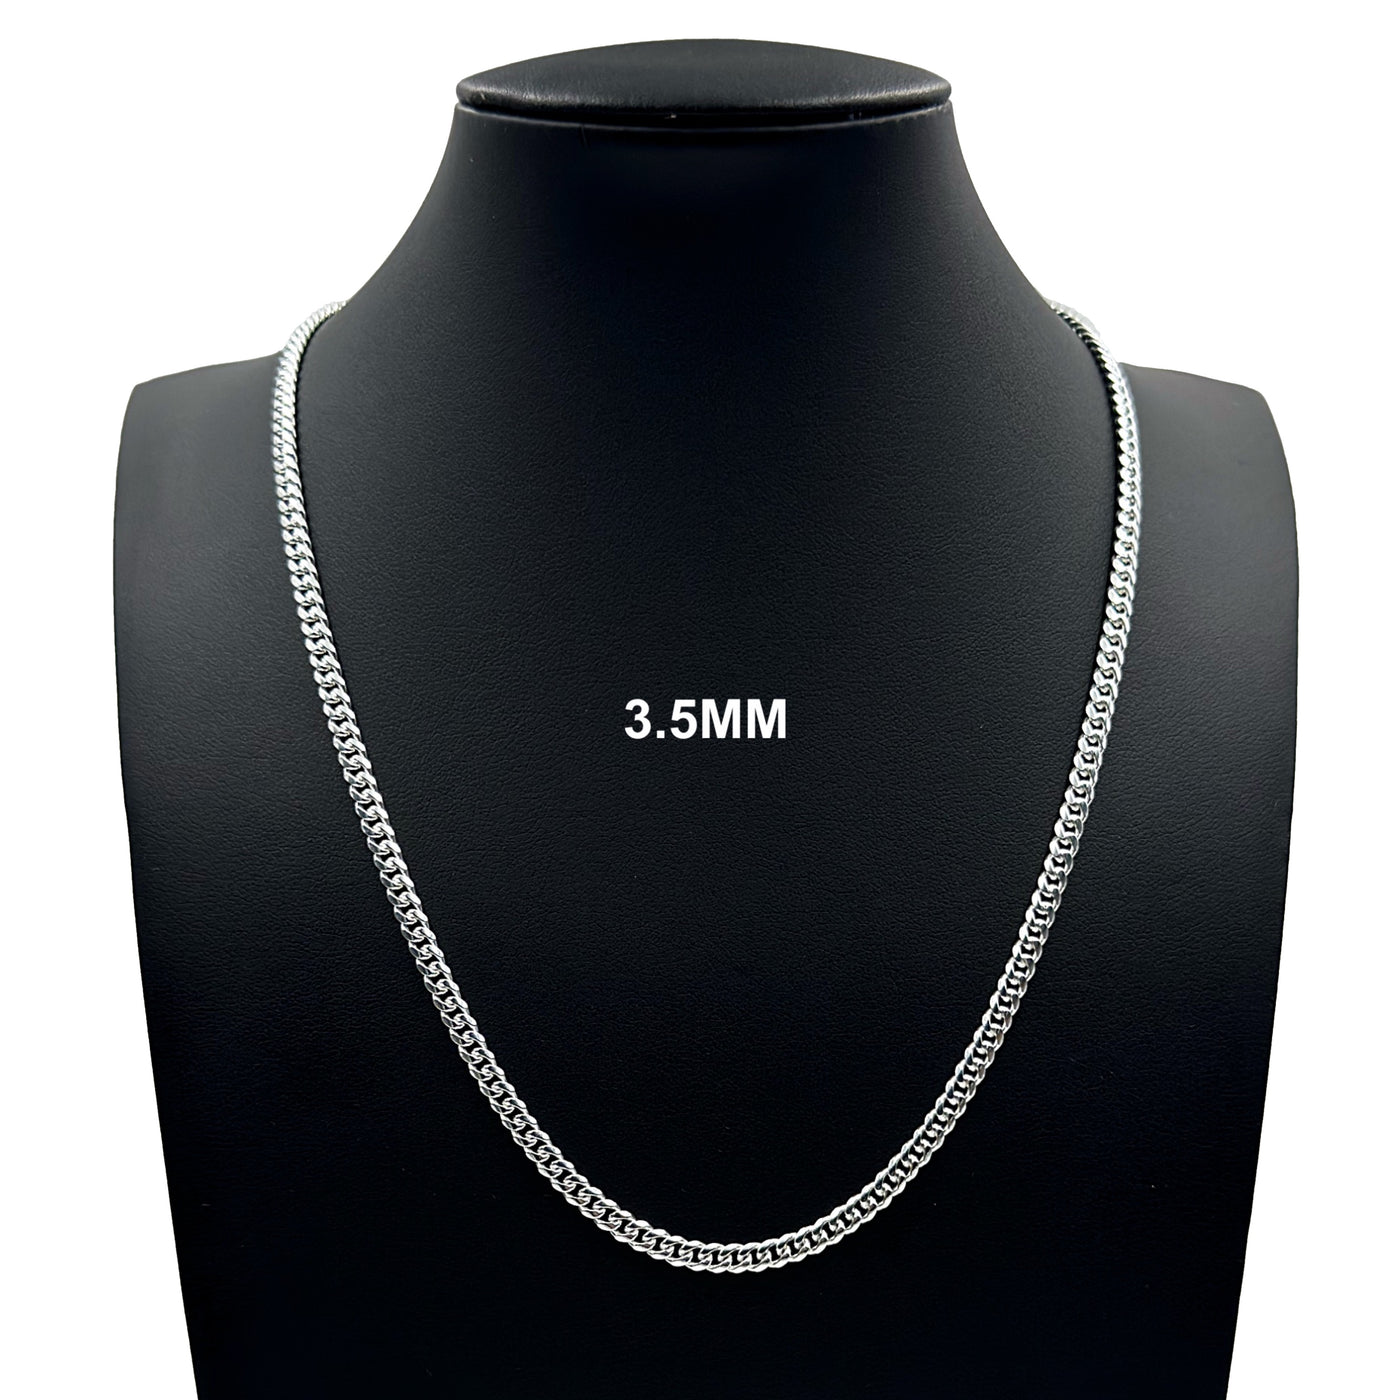 Real 3.5MM Solid 925 Sterling Silver Italian MIAMI CUBAN LINK CHAIN Necklace UNISEX